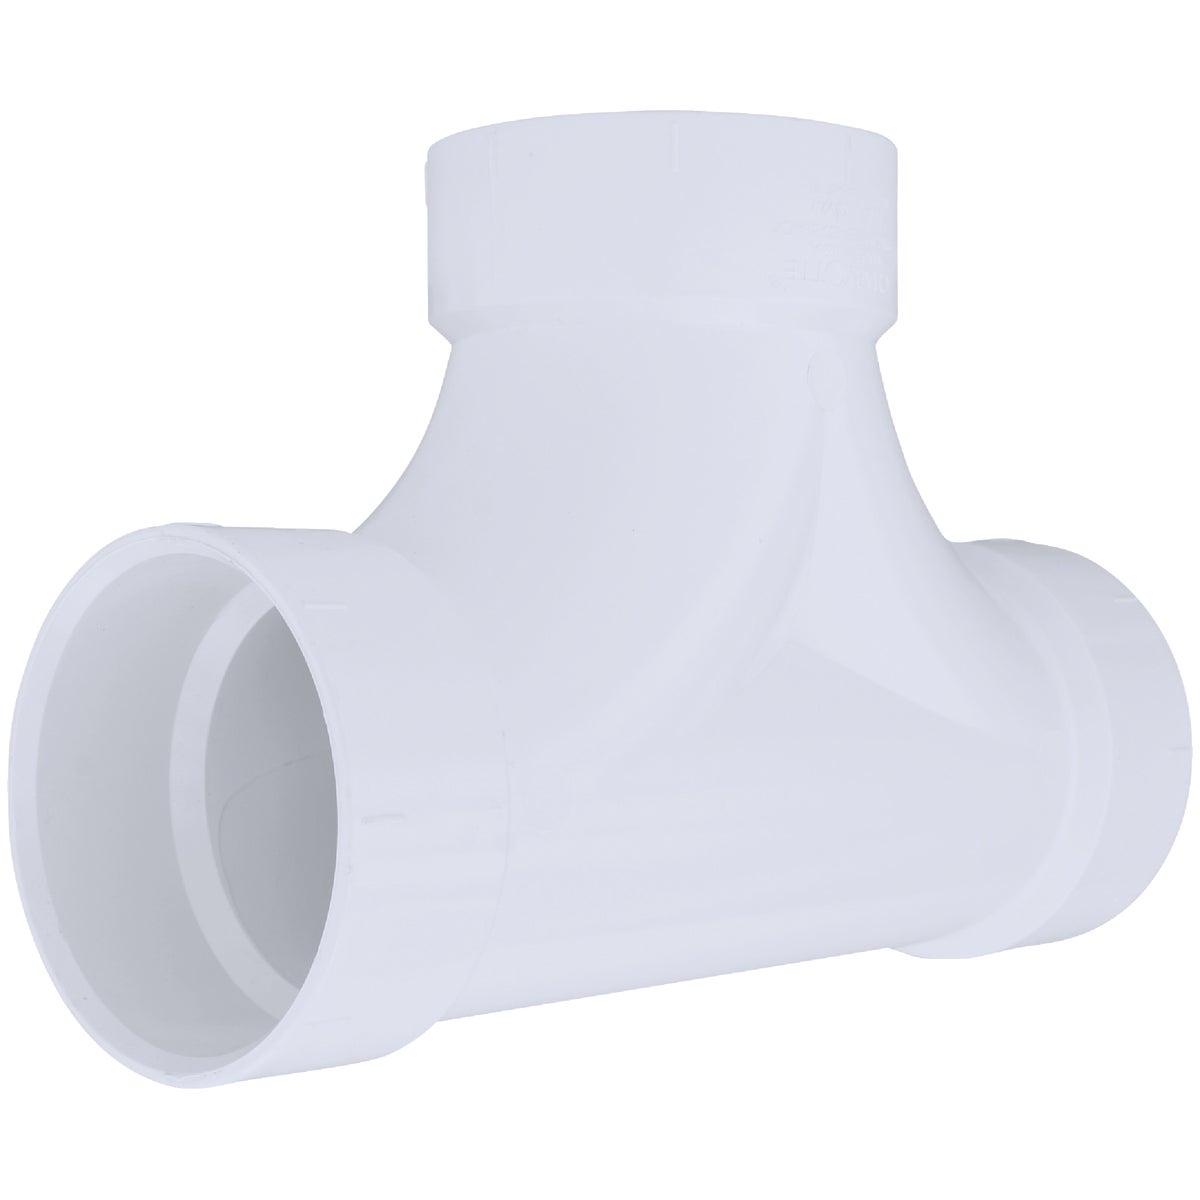 Charlotte Pipe 4 In. Schedule 40 DWV 2-Way PVC Cleanout Tee